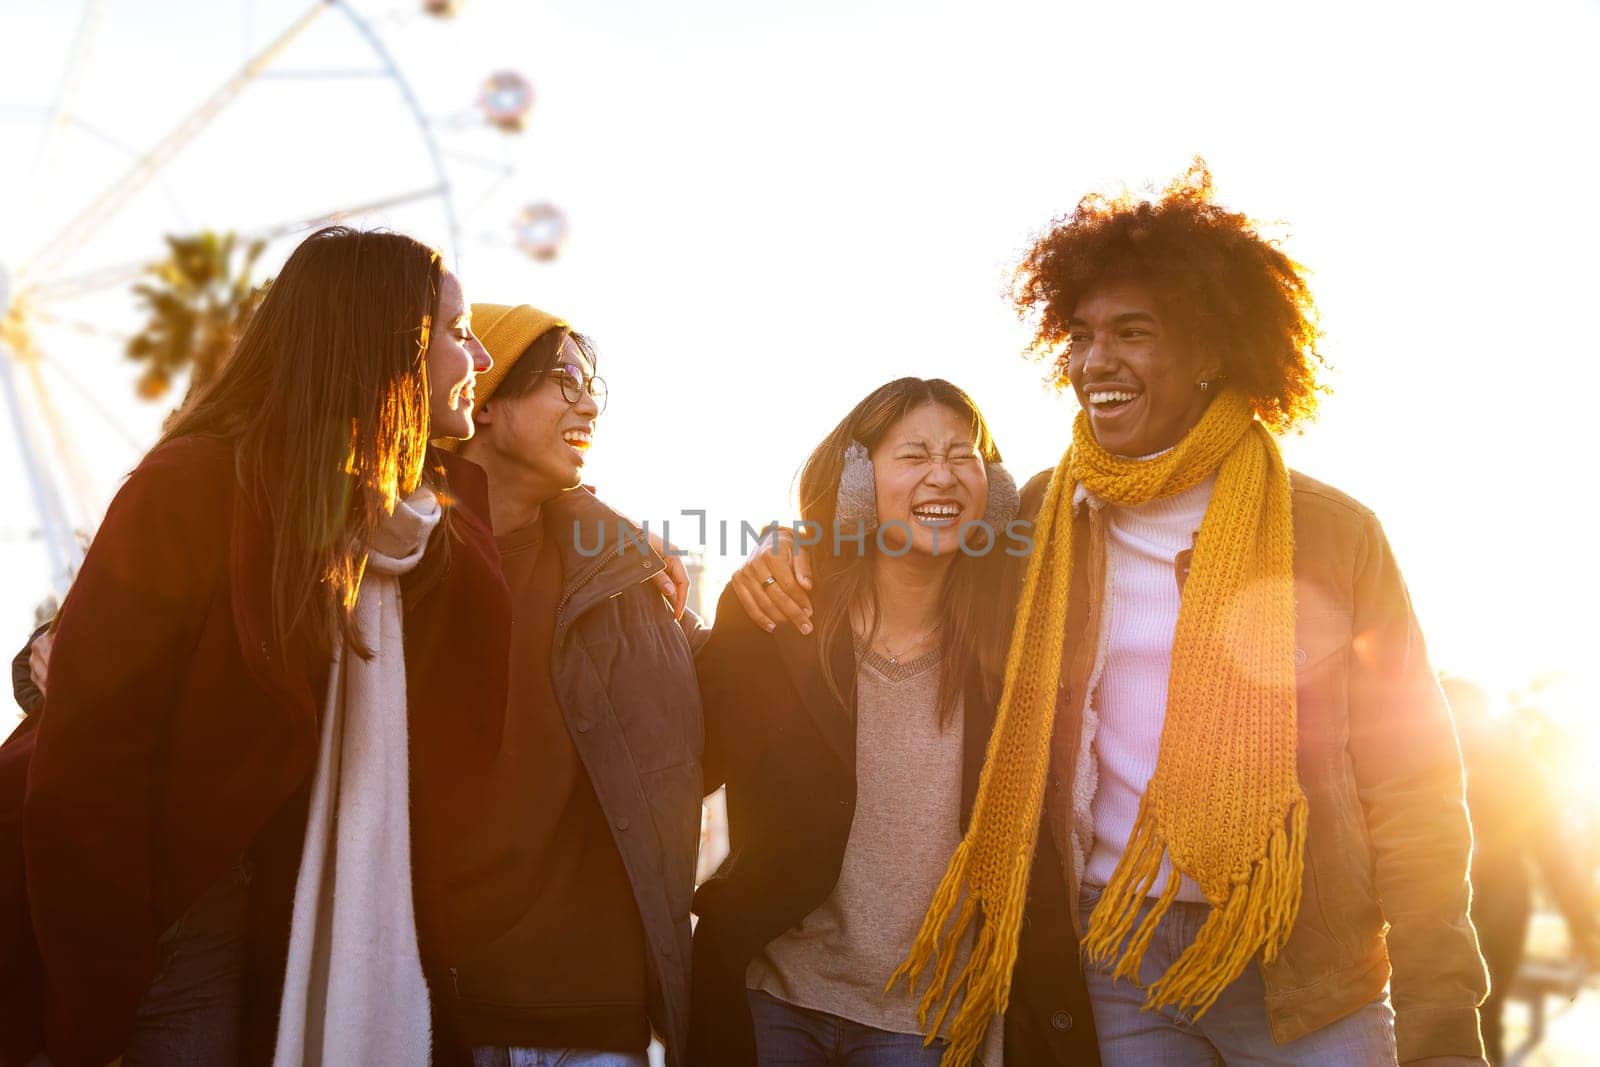 Group of friends laughing while embracing and walking together on sunny winter day in the city. Friendship and lifestyle concept.